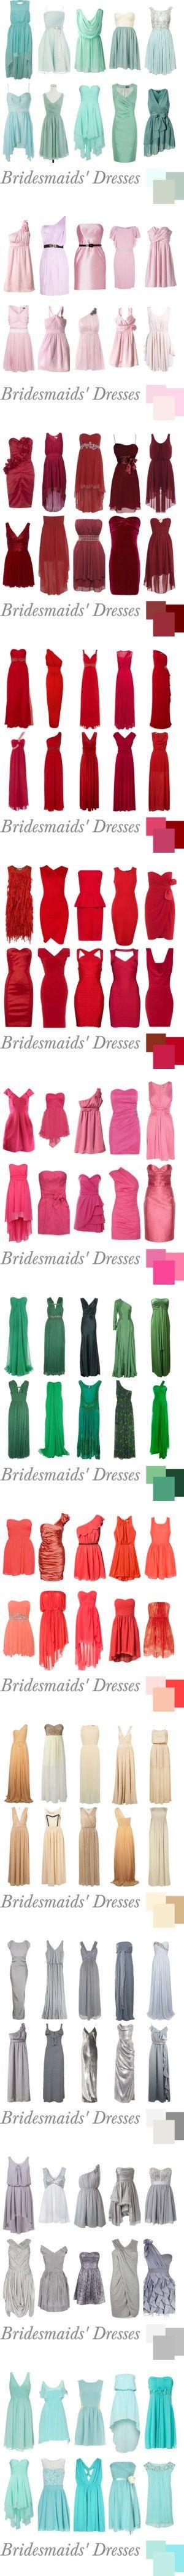 Wedding - Bridesmaids-What Look Are You Shooting For? - Weddingbee